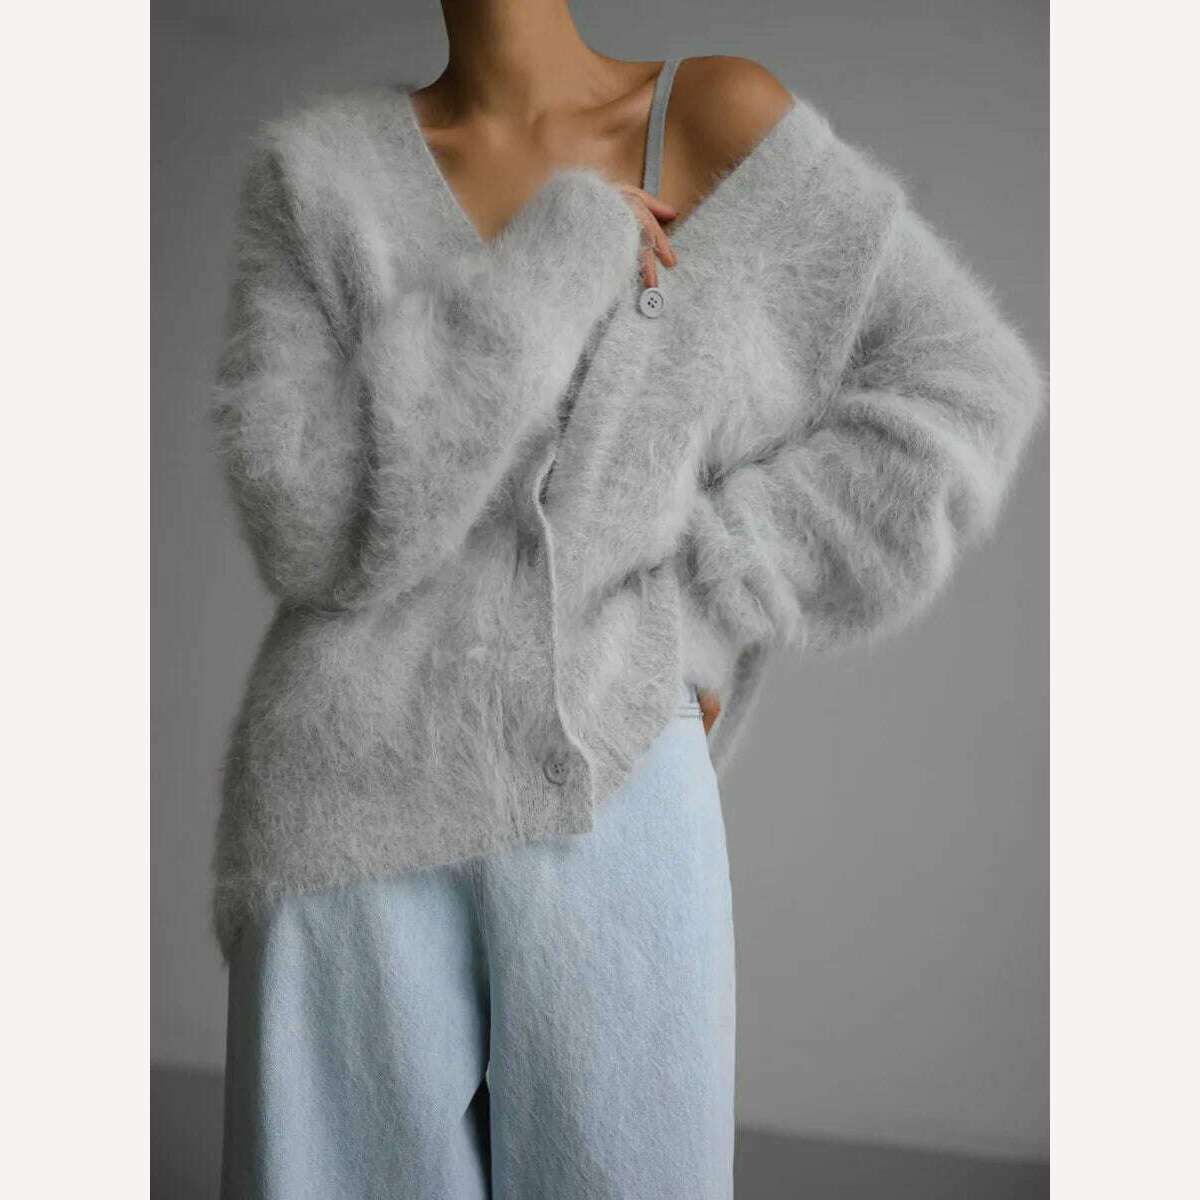 KIMLUD, Fluffy Mohair Cardigan For Women V-Neck Button Up Oversize Cardigan Sweater Autumn Winter Warm Knitted Outerwear, Light Grey / S, KIMLUD Womens Clothes